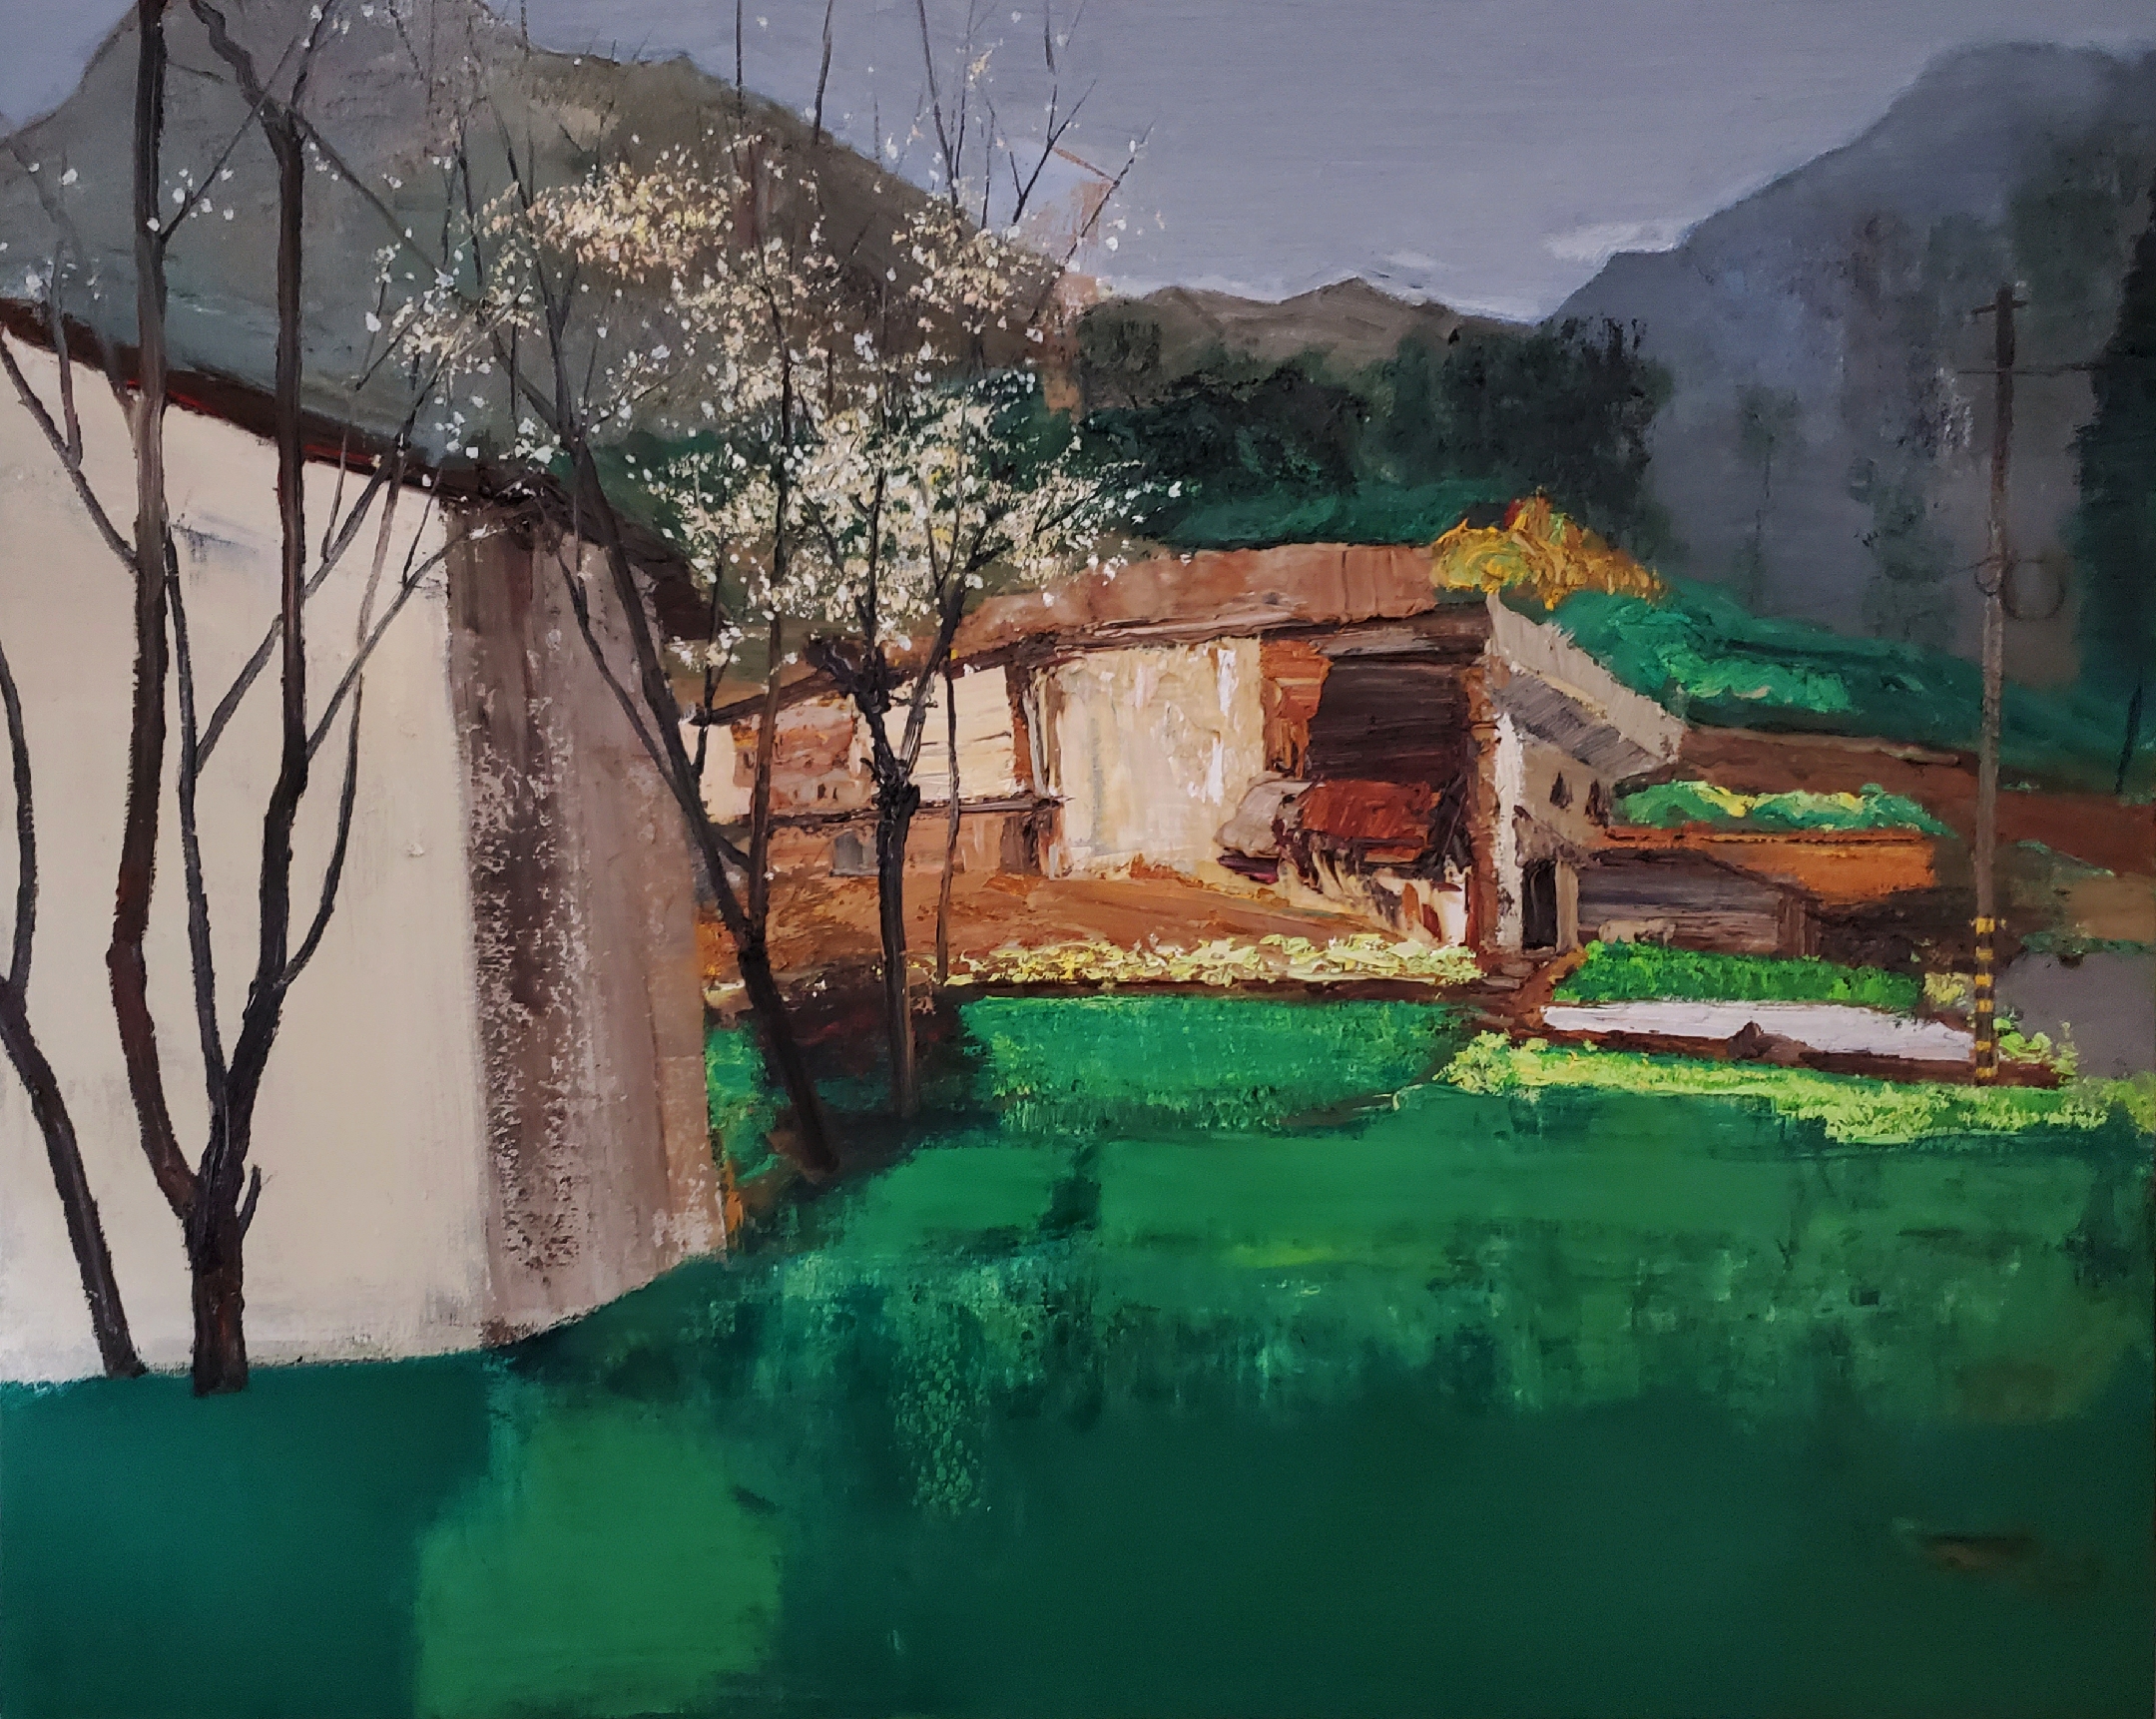 9 Oil painting landscape from Anhui Province China